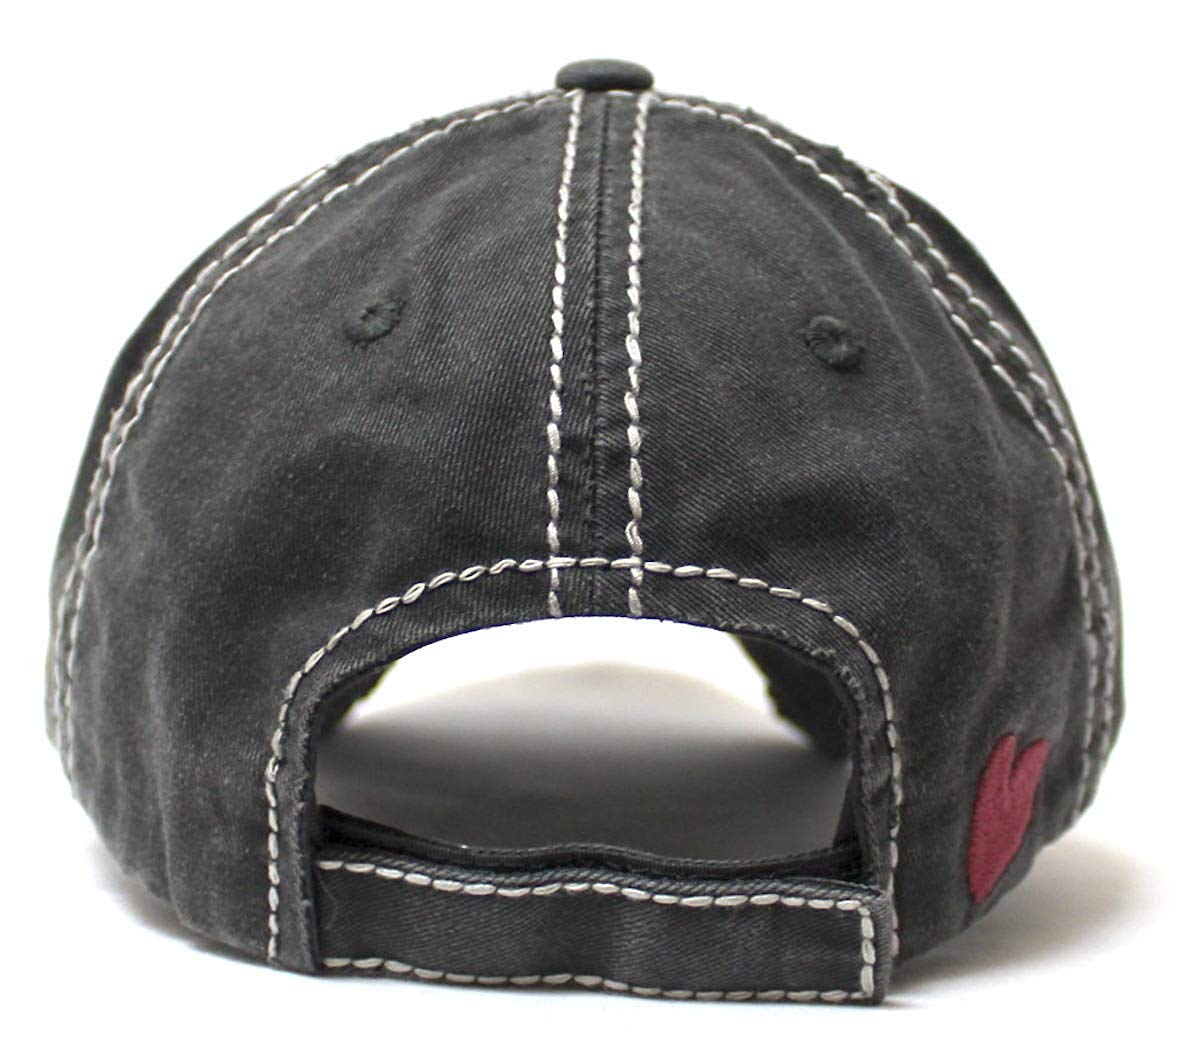 Women's Distressed Ballcap I Gotta Good Heart but This Mouth Hearts, Kisses Patch Embroidery Hat, Vintage Black - Caps 'N Vintage 